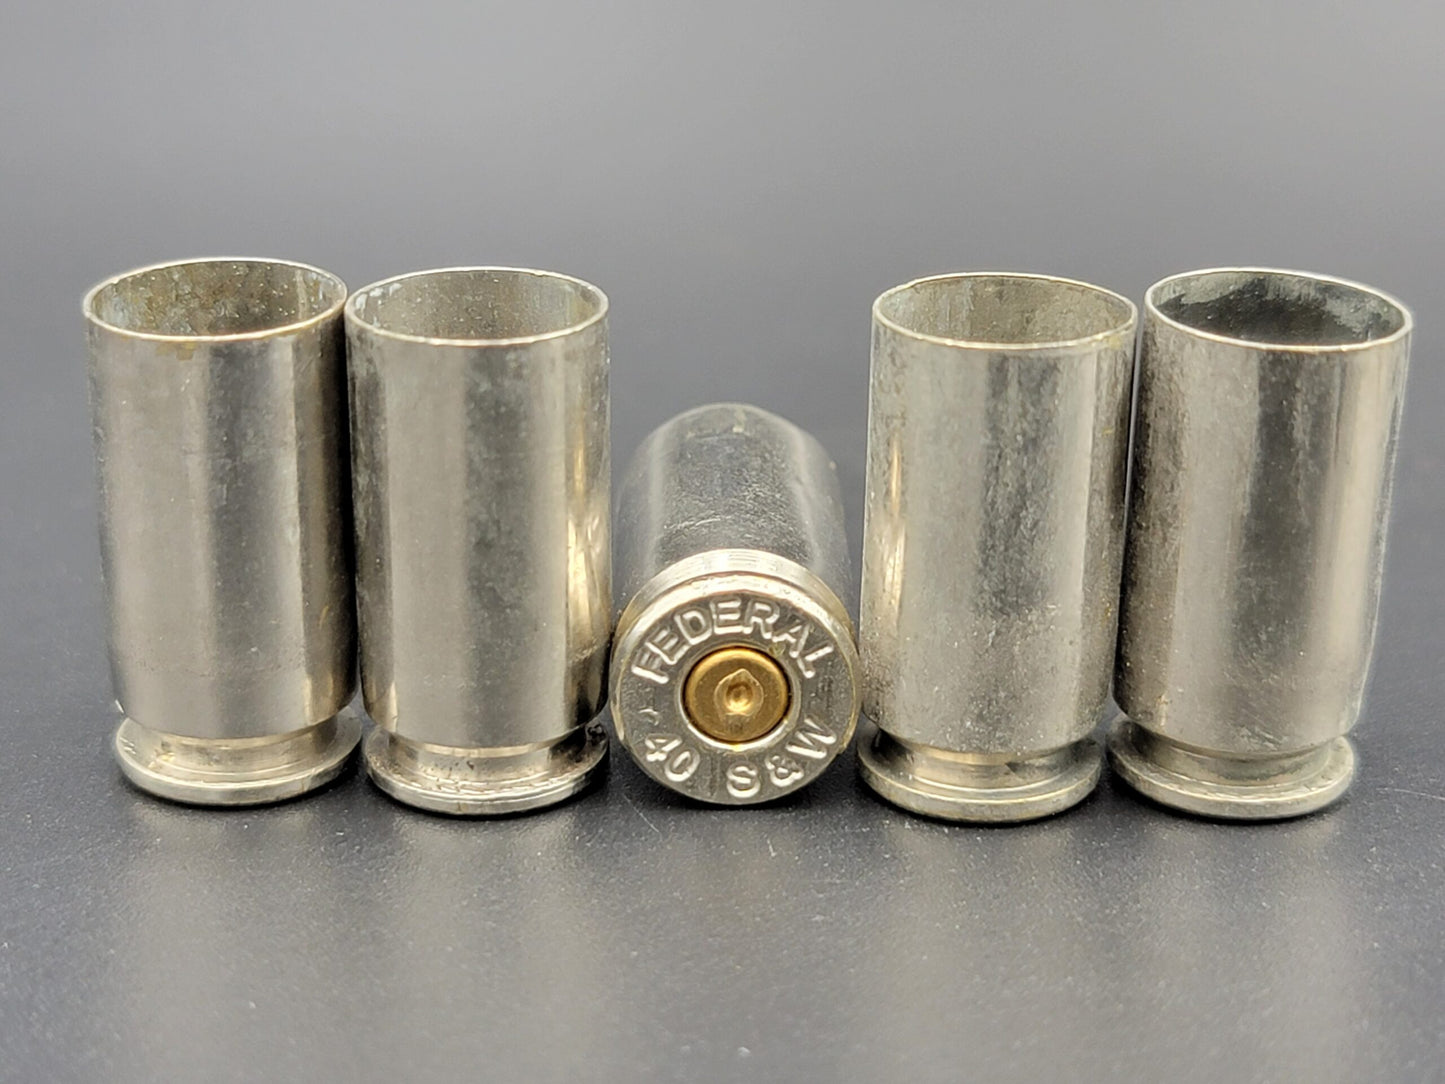 40 S&W once fired pistol nickel. Hand sorted from reputable indoor/military ranges for reloading. Reliable spent casings for precision shooting.